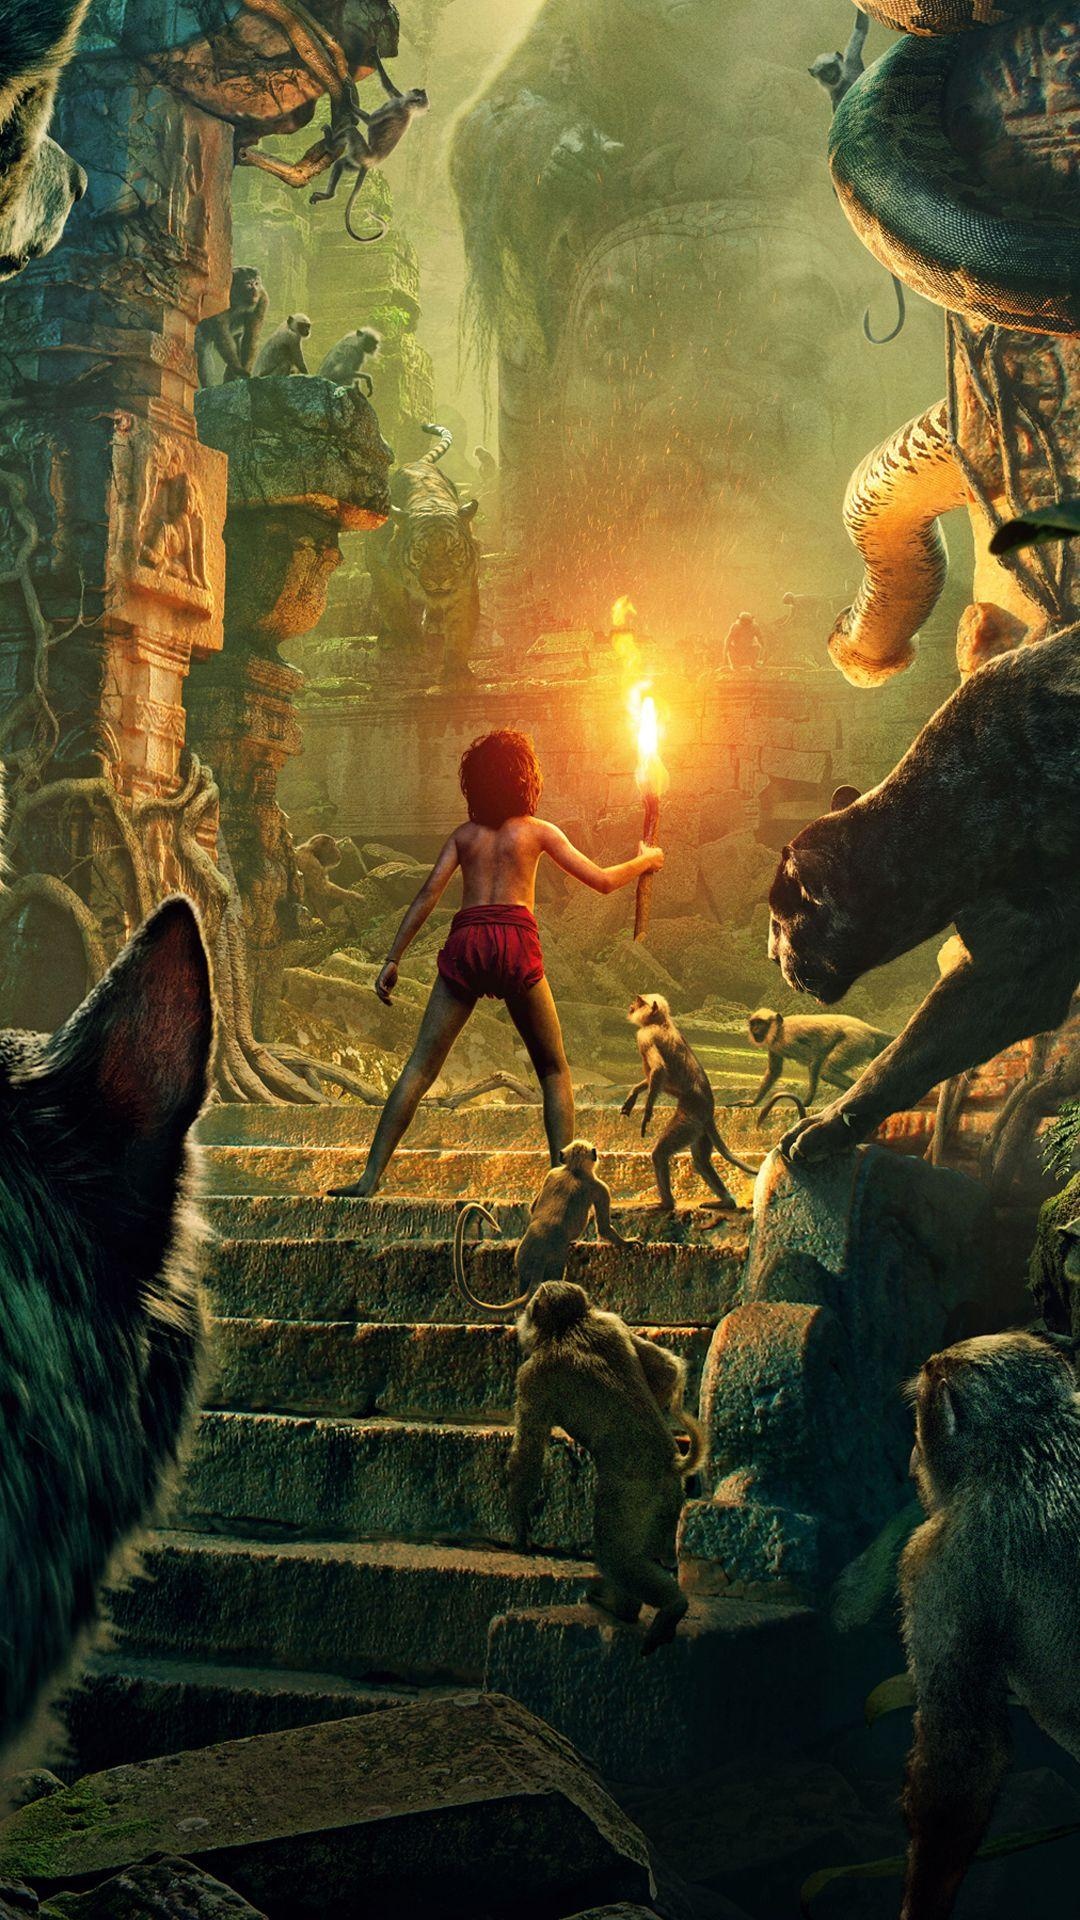 The Jungle Book movie, Jungle-inspired wallpapers, Nature's wonders, Captivating visuals, 1080x1920 Full HD Handy